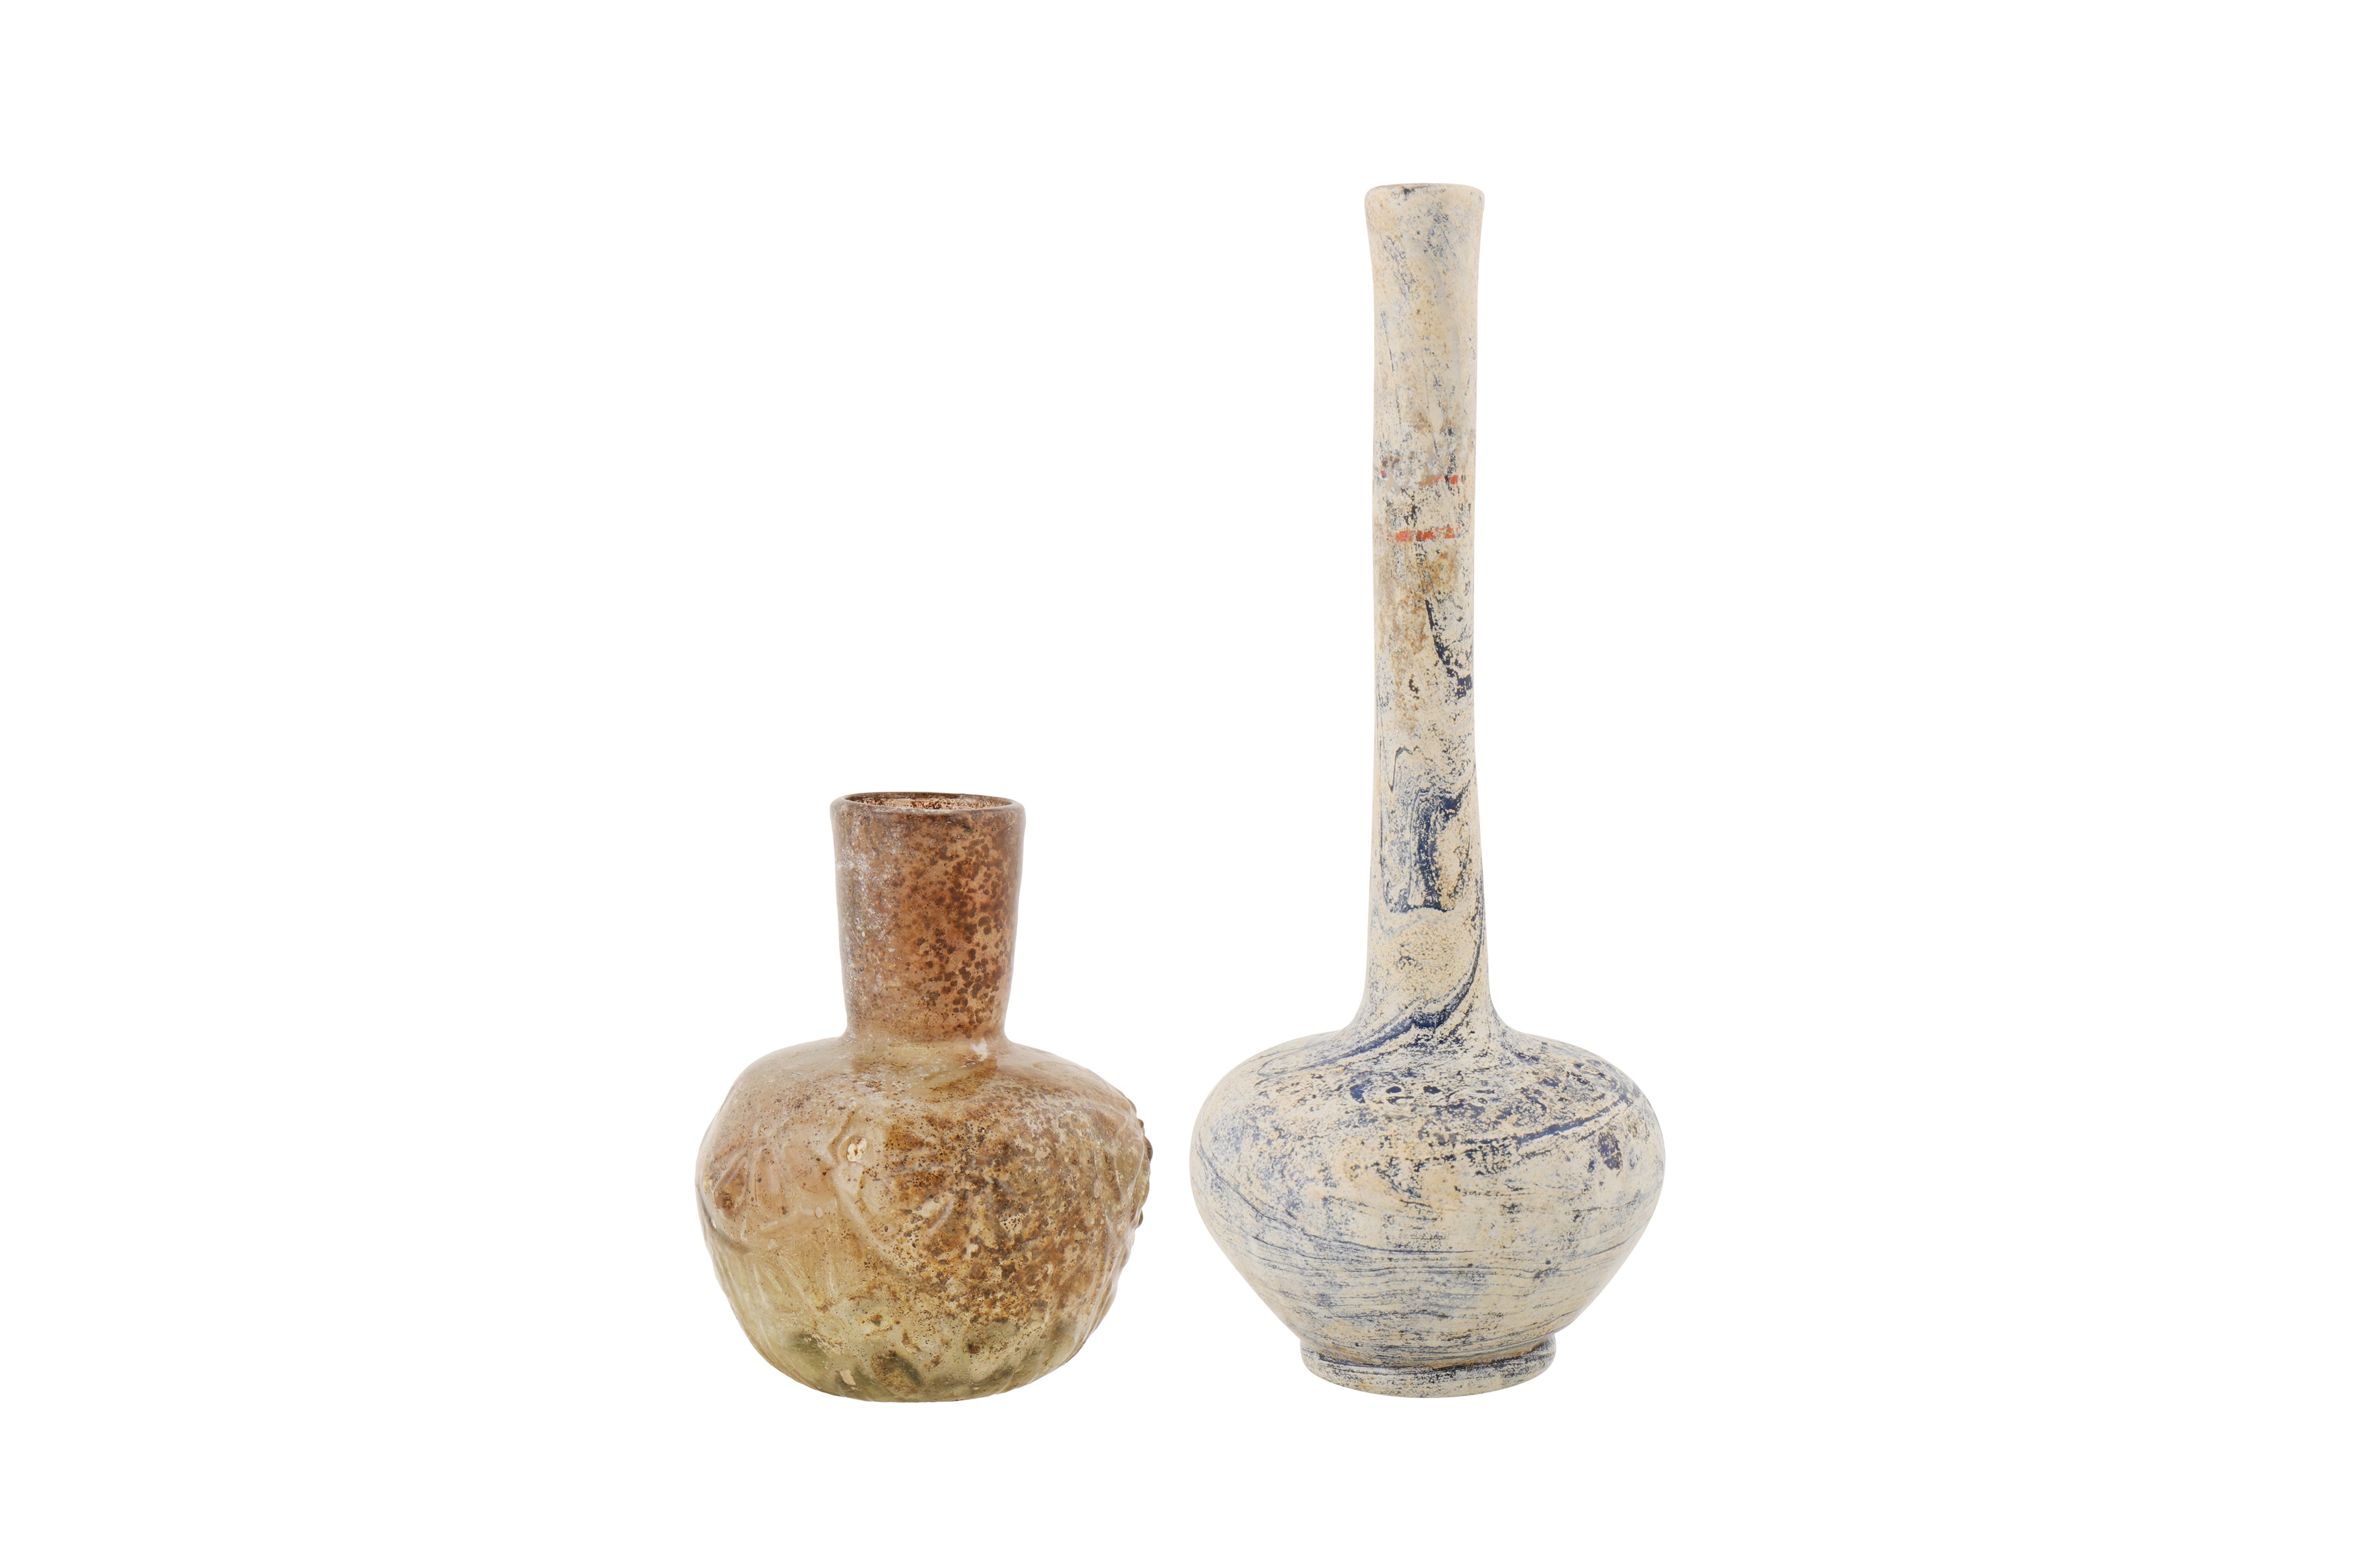 TWO EARLY ISLAMIC GLASS VESSELS